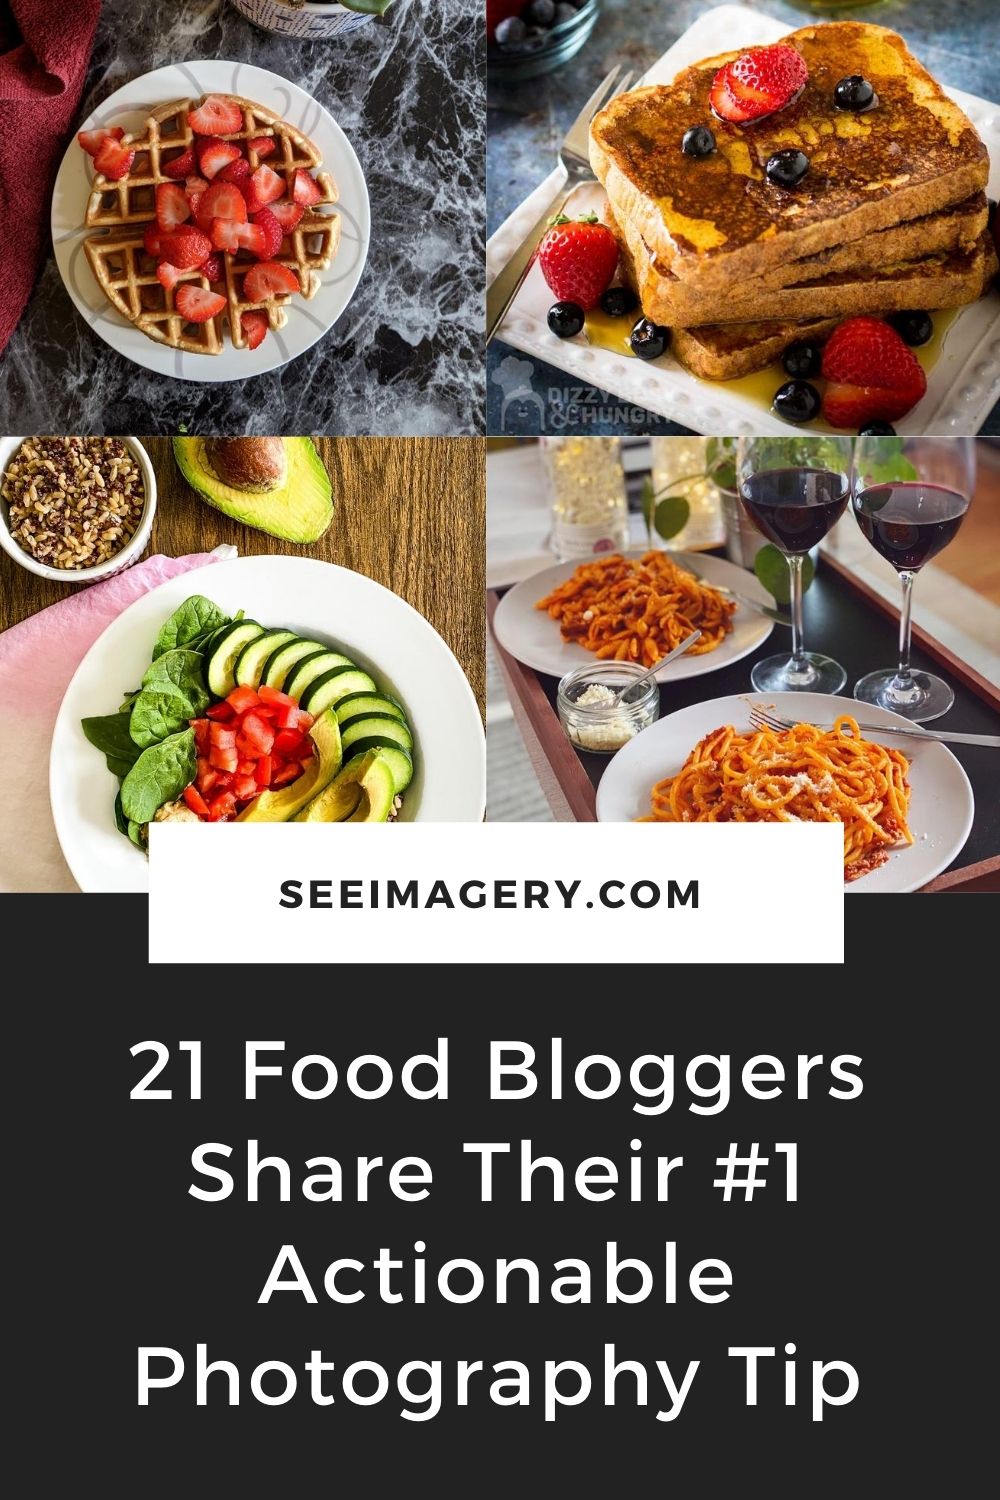 21 Food Bloggers Share their #1 Actionable Photography Tip Pinterest Pin